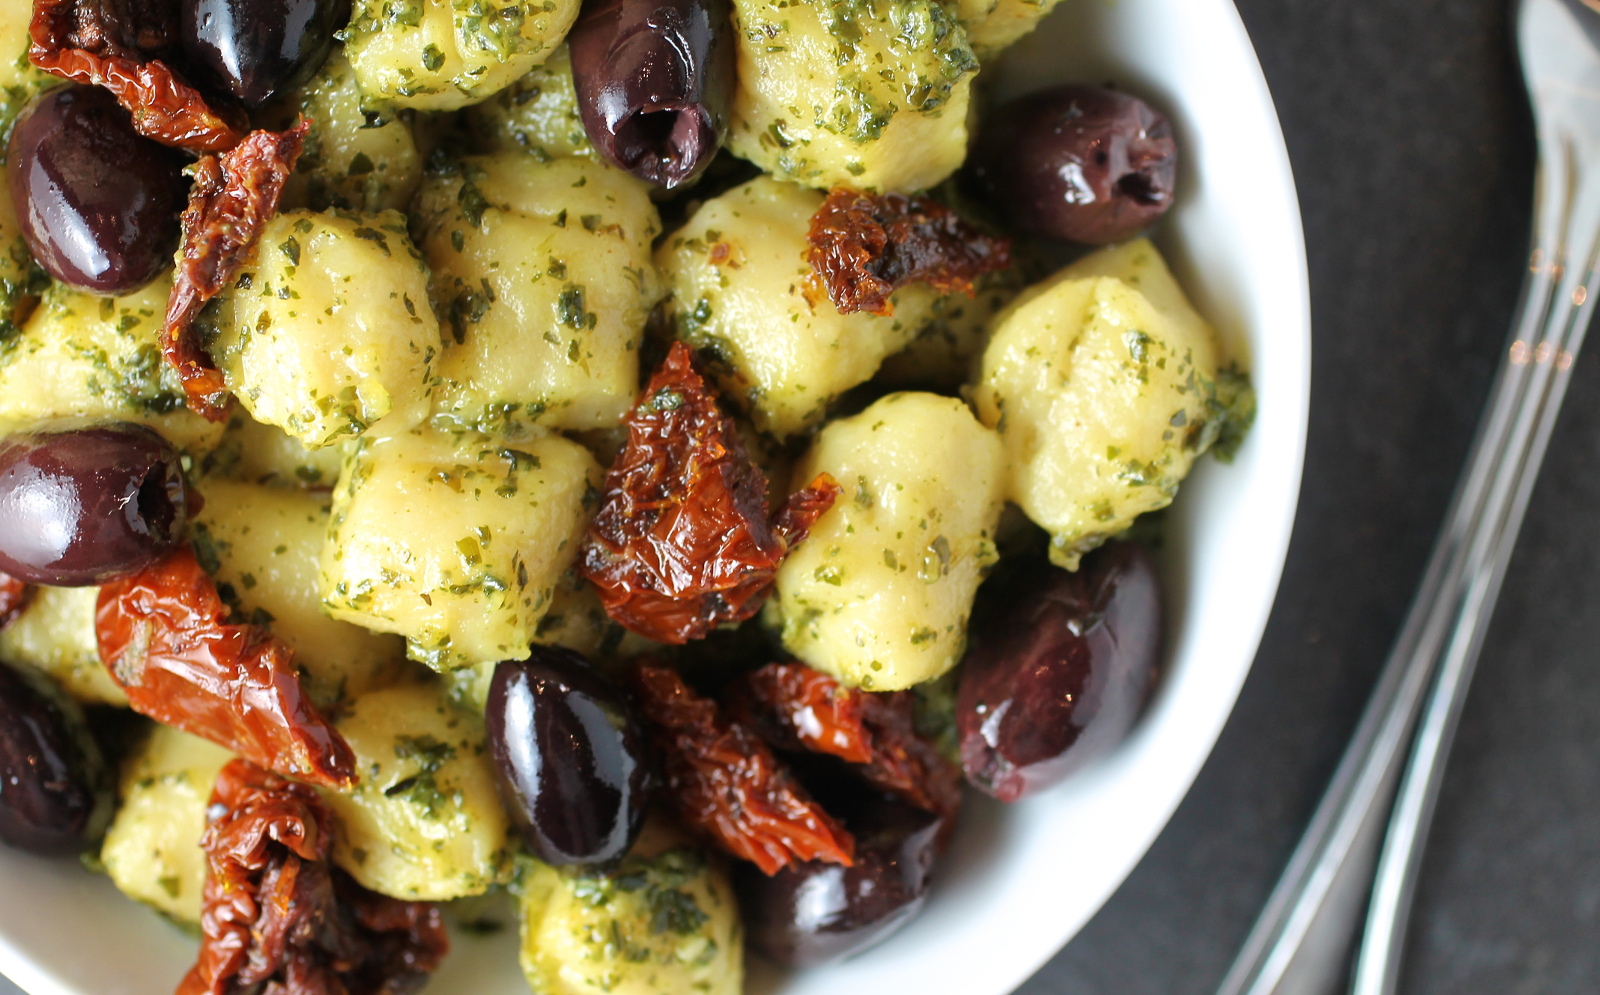 Pesto Gnocchi with Olives and Sun-Dried Tomatoes